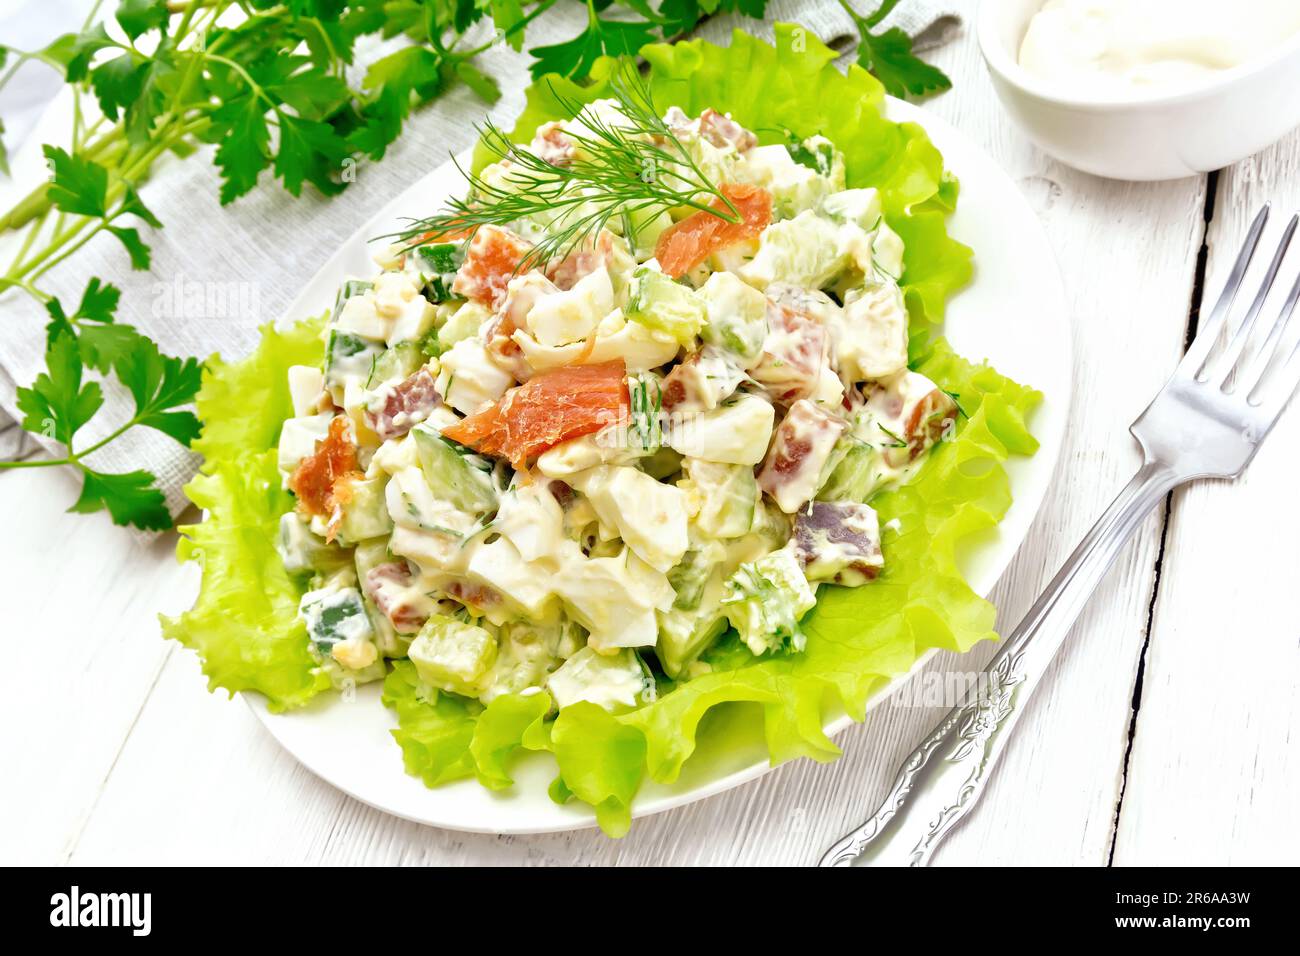 Salad from salmon, cucumber, eggs and avocado, dressed with mayonnaise on lettuce leaves in a plate, kitchen towel, dill, parsley and fork on a wooden Stock Photo